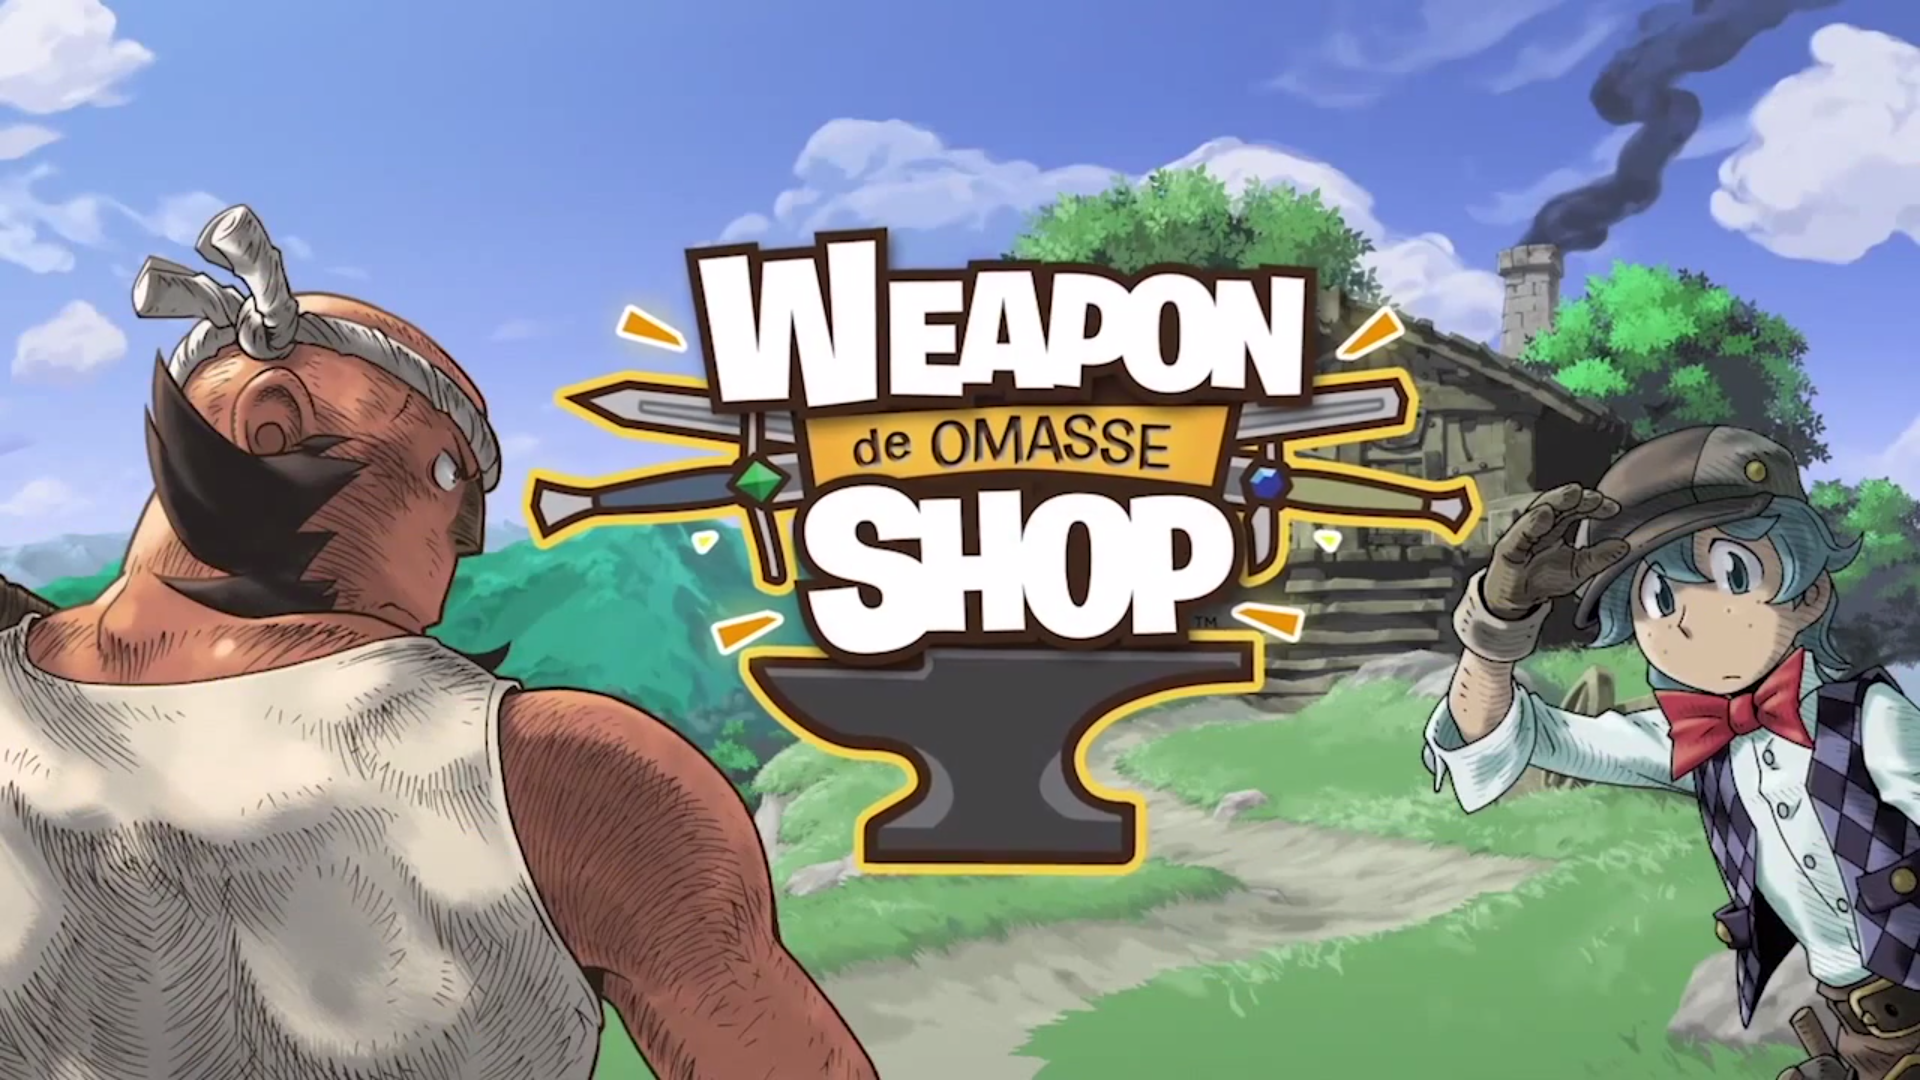 PR: Level-5 Releases Weapon Shop de Omasse For Nintendo 3DS In Europe And North America